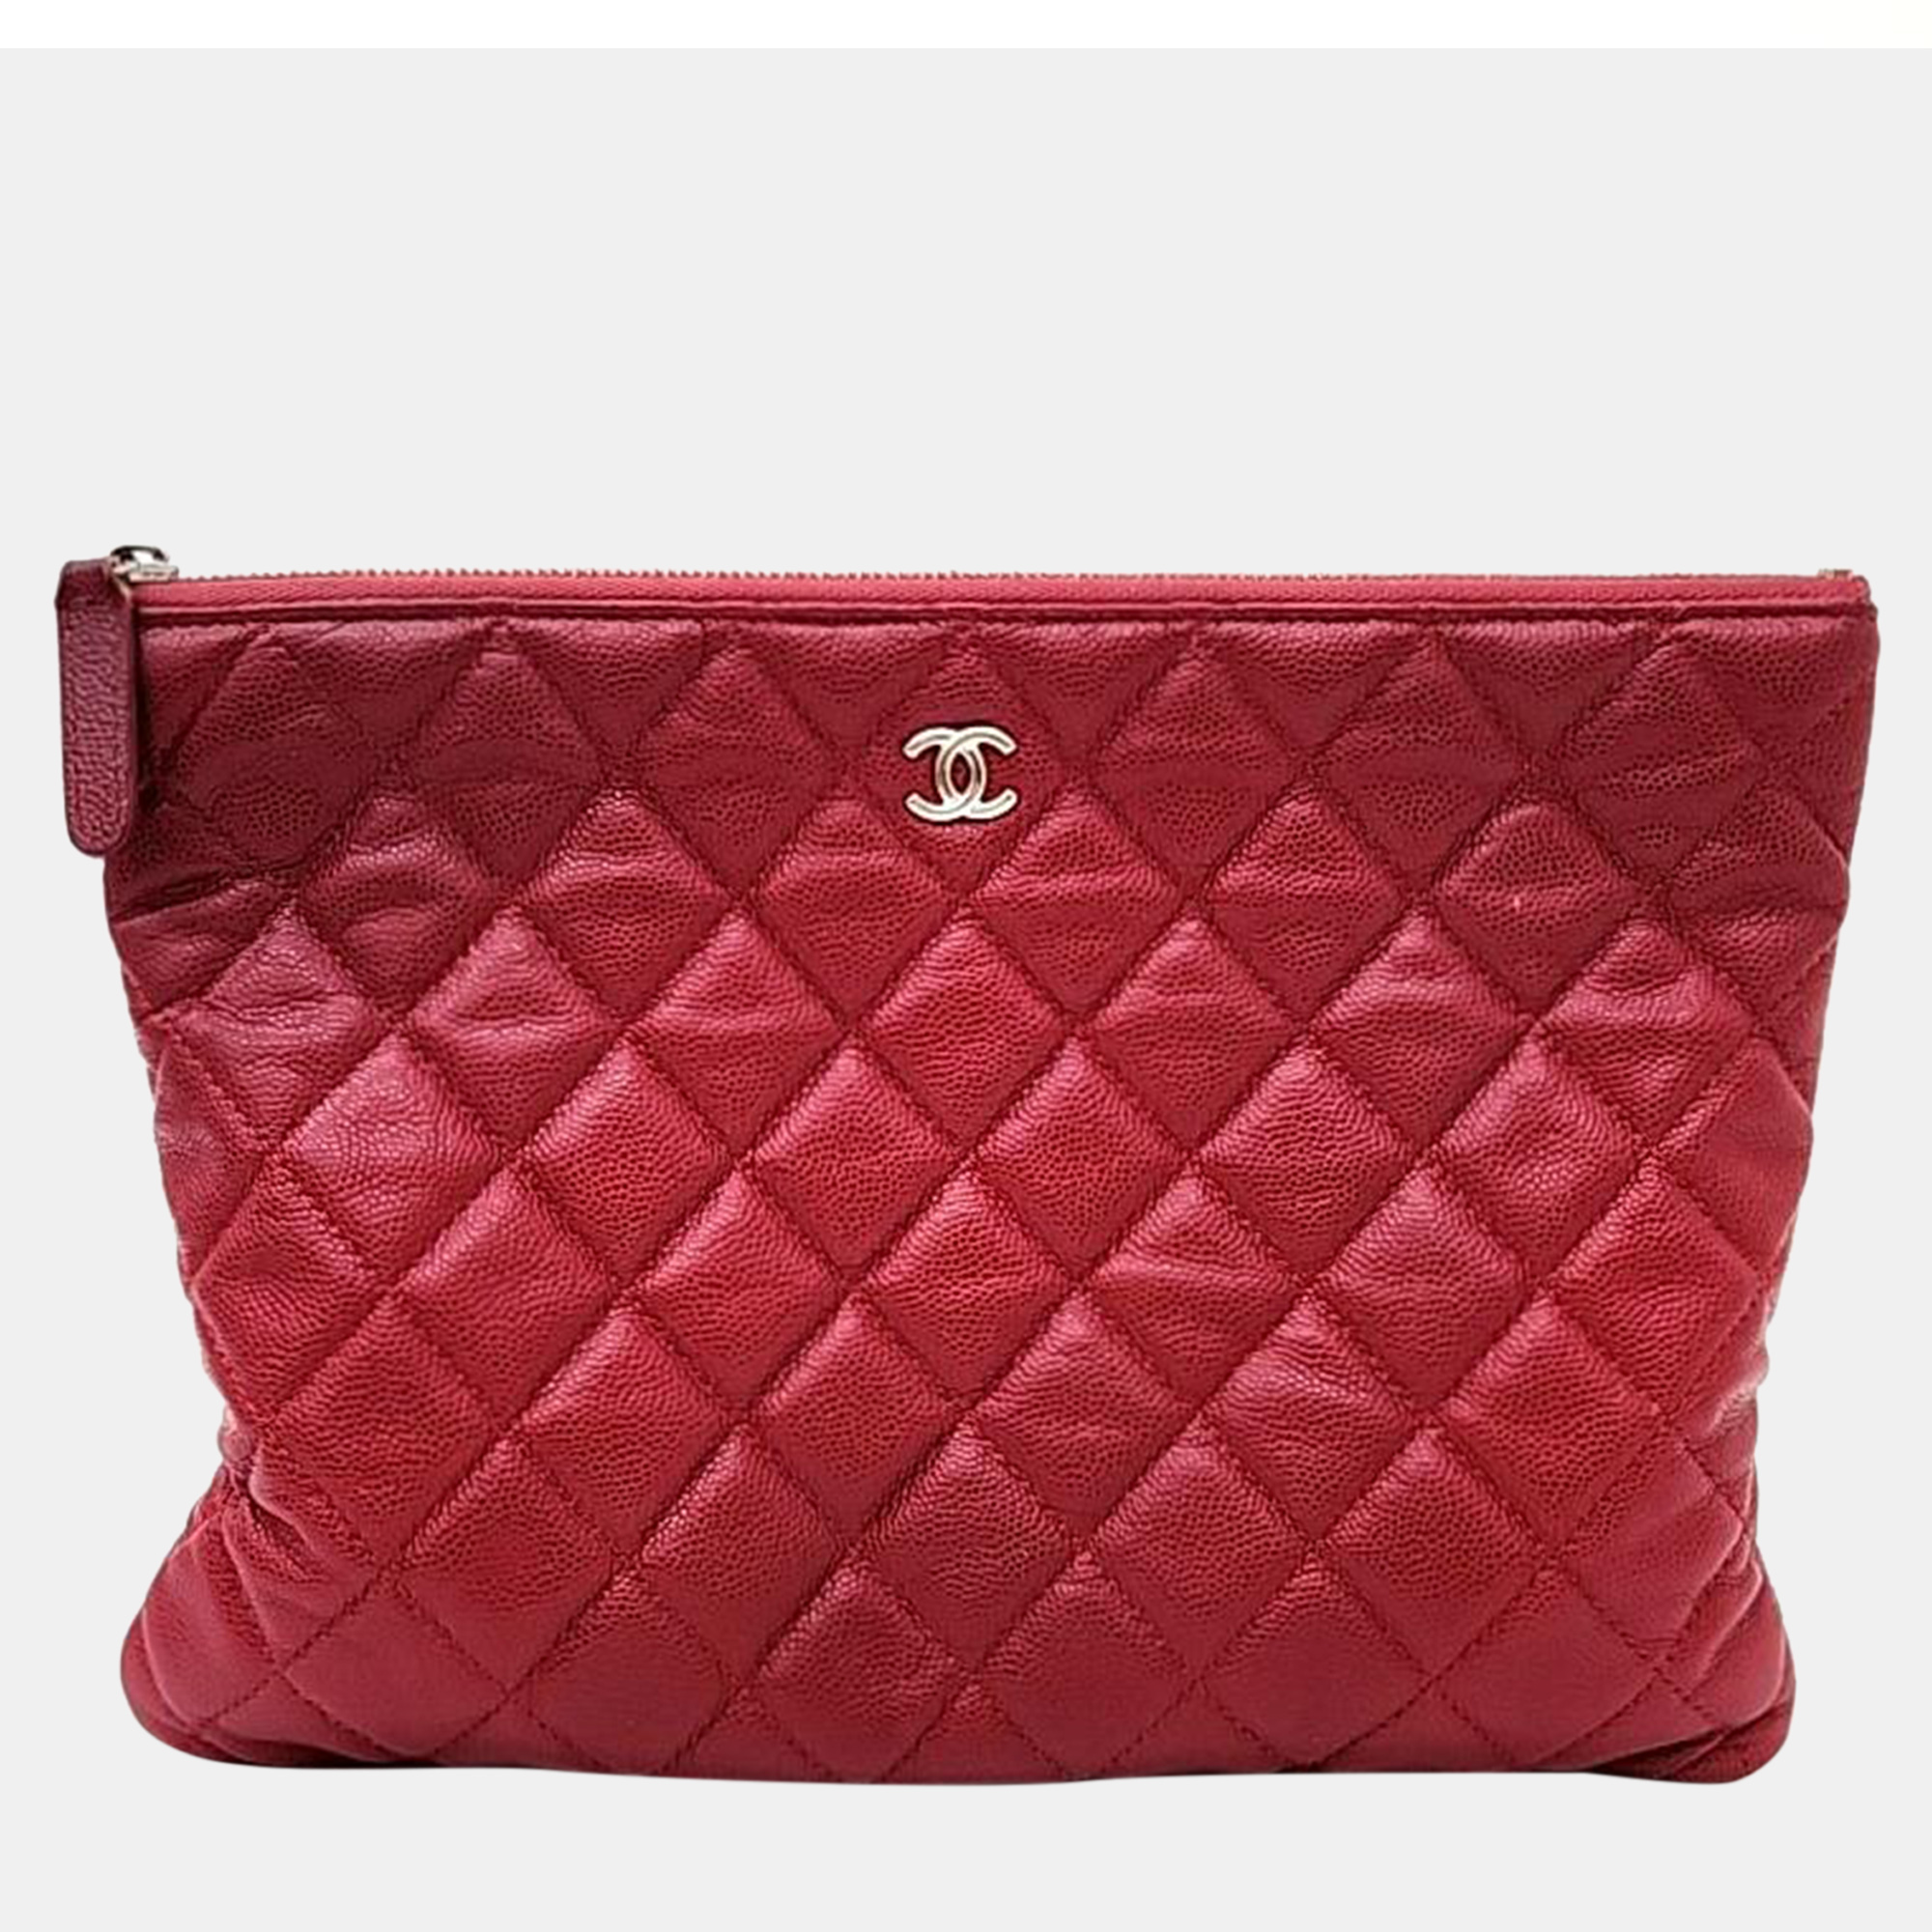 Pre-owned Chanel Red Caviar Clutch New Medium